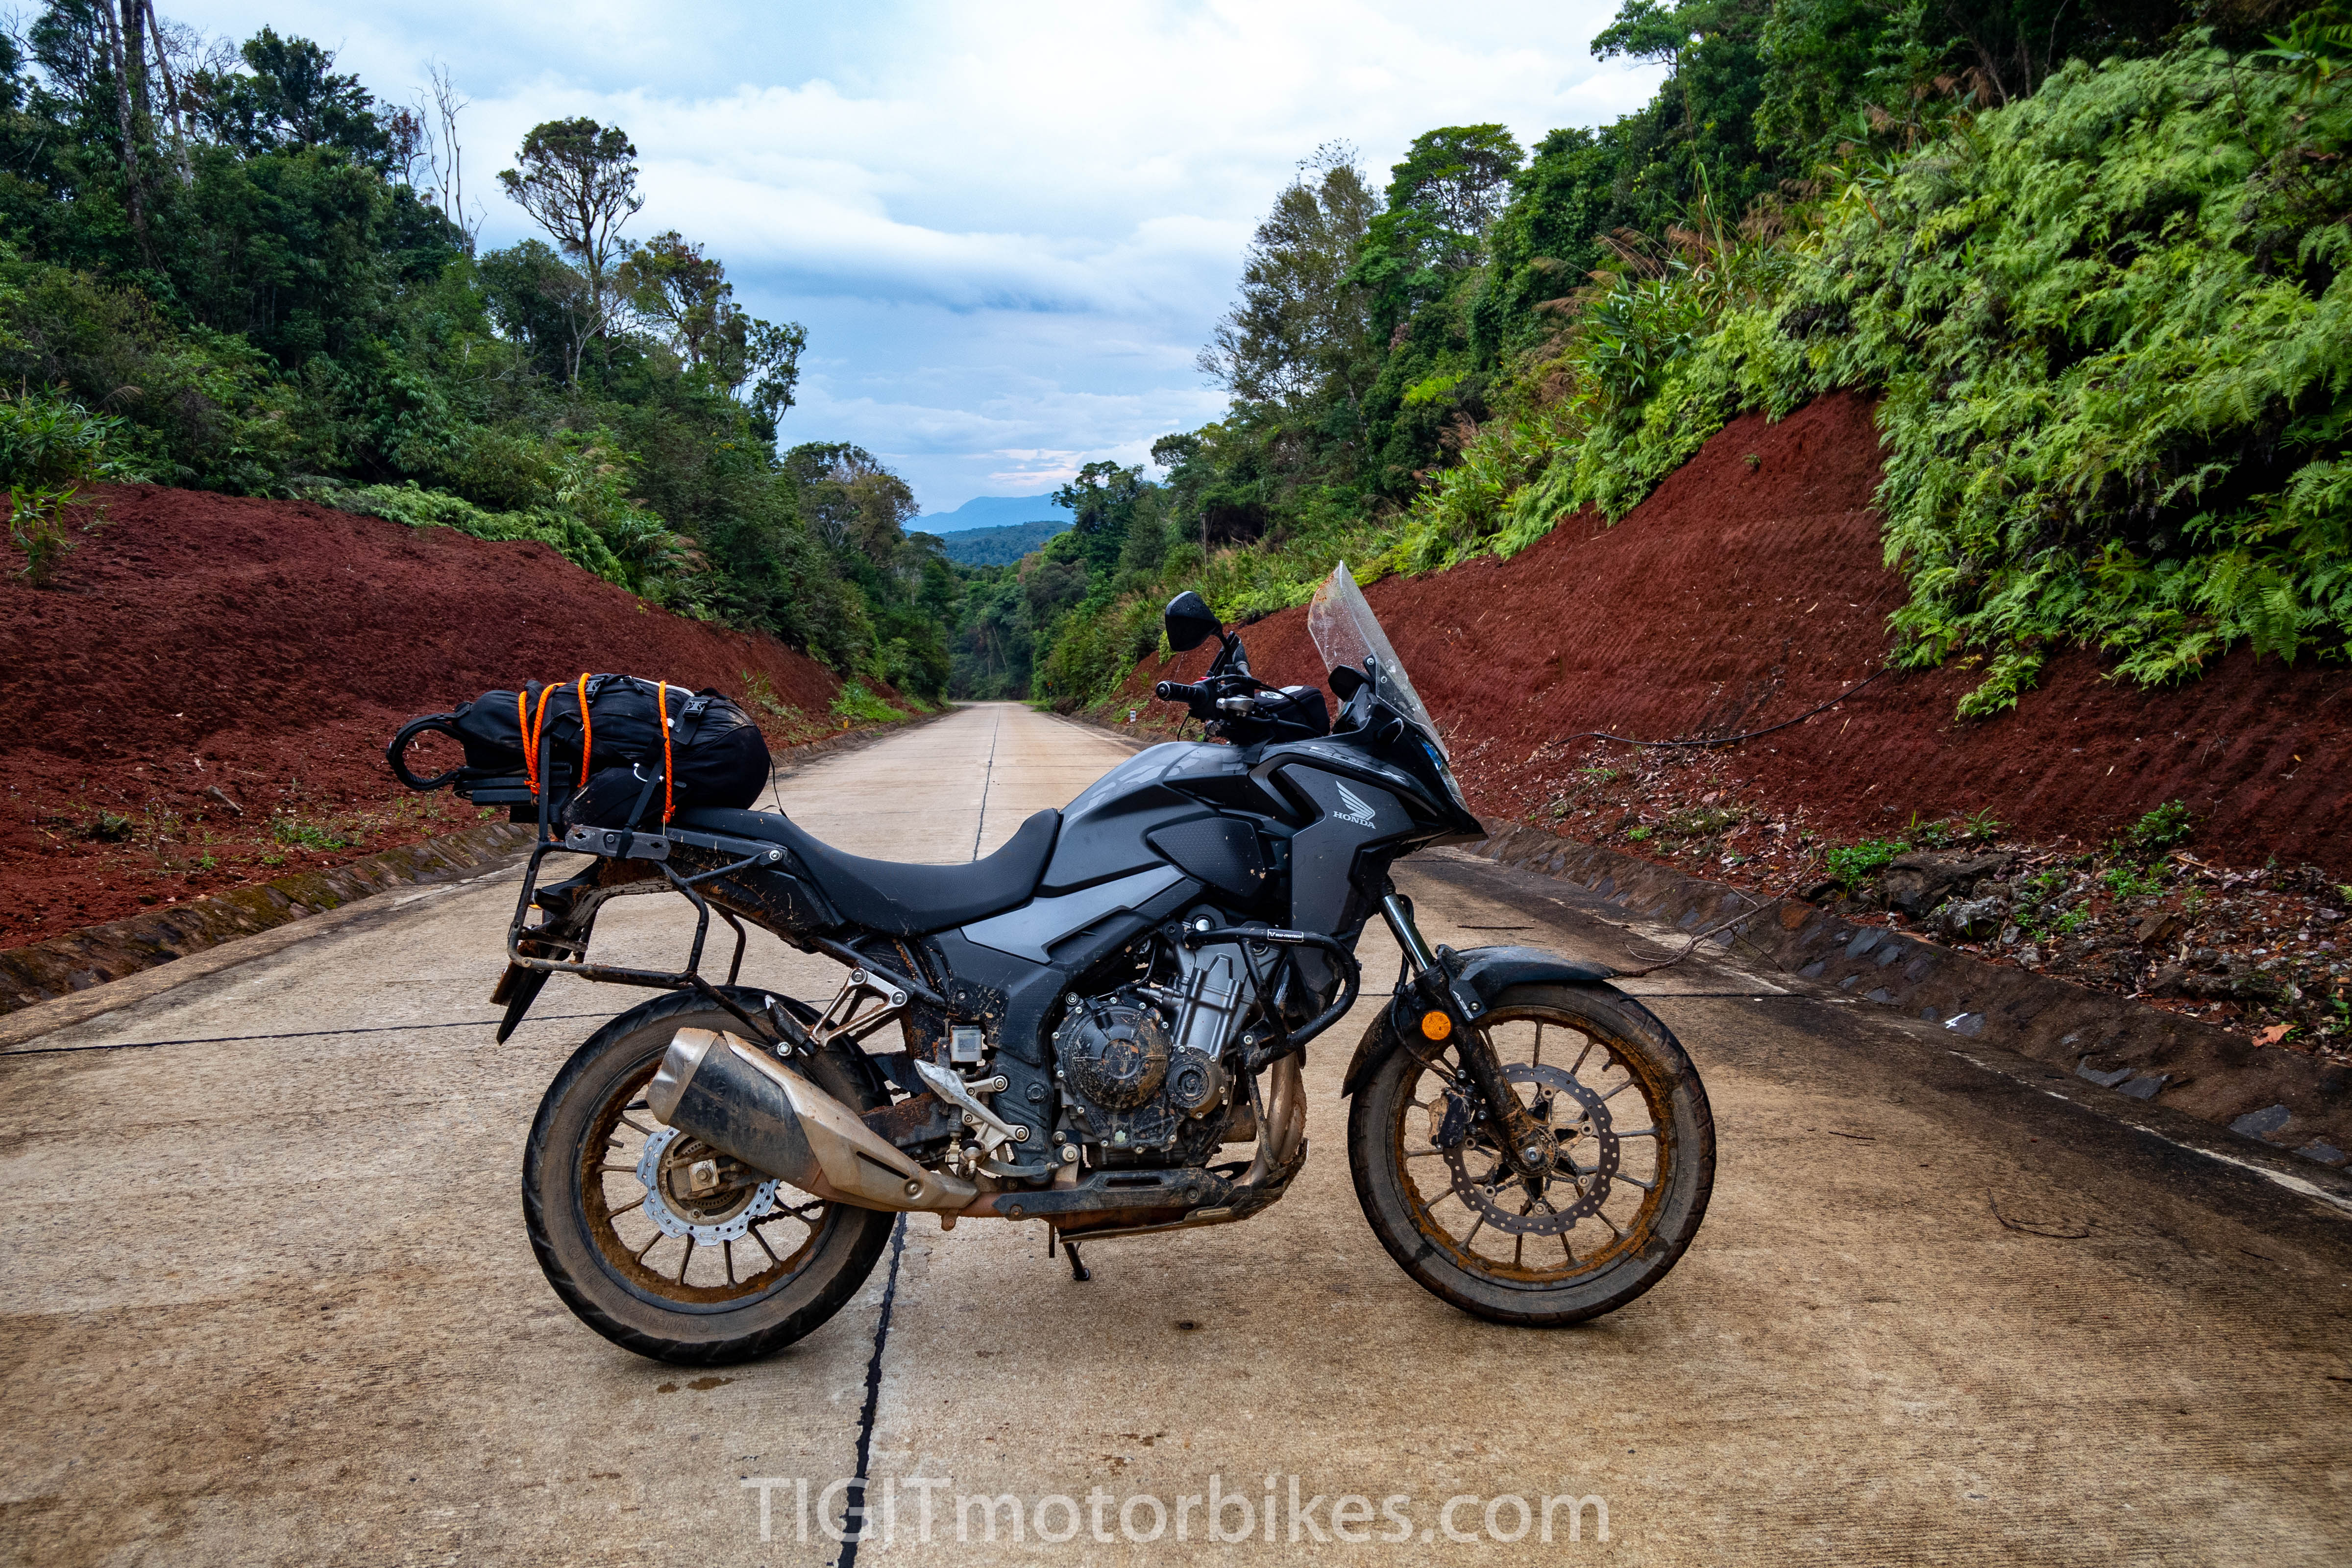 Remote and fast paced Vietnamese road